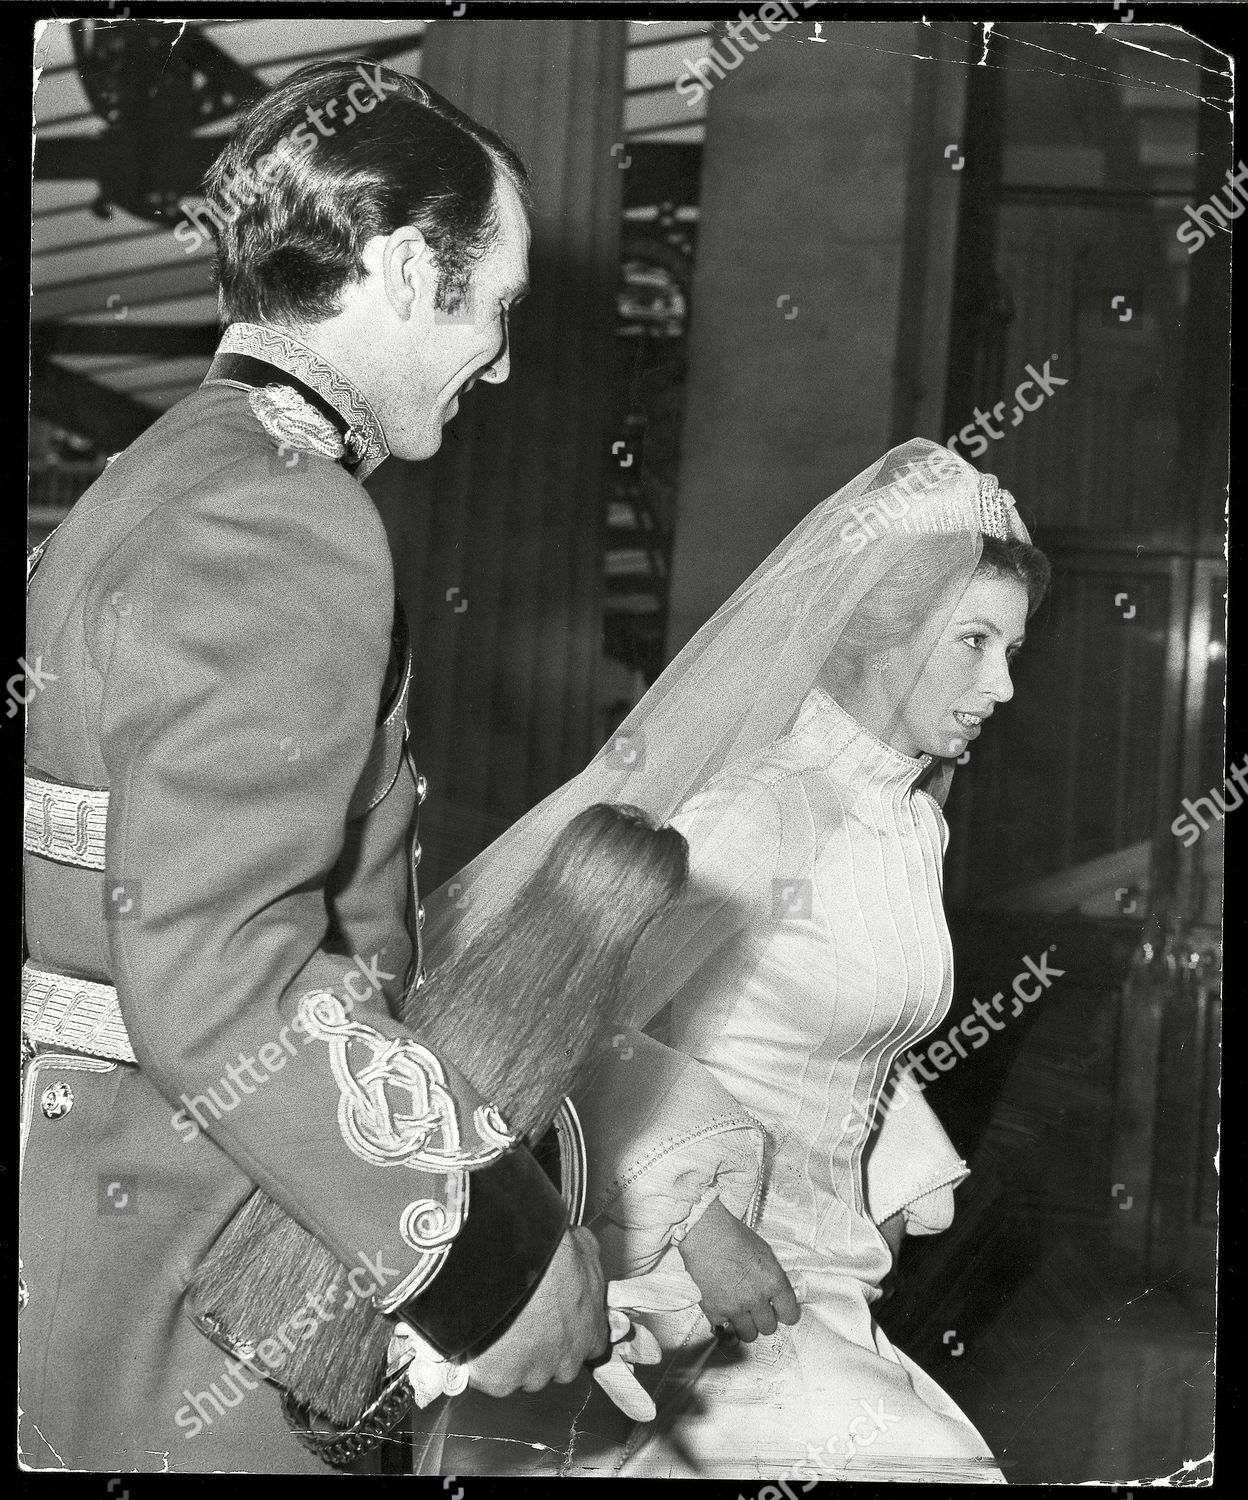 princess-anne-marries-her-royal-highness-princess-anne-now-princess-royal-with-mark-phillips-at-buckingham-palace-on-the-return-from-their-wedding-on-november-14-1973-shutterstock-editorial-889205a.jpg